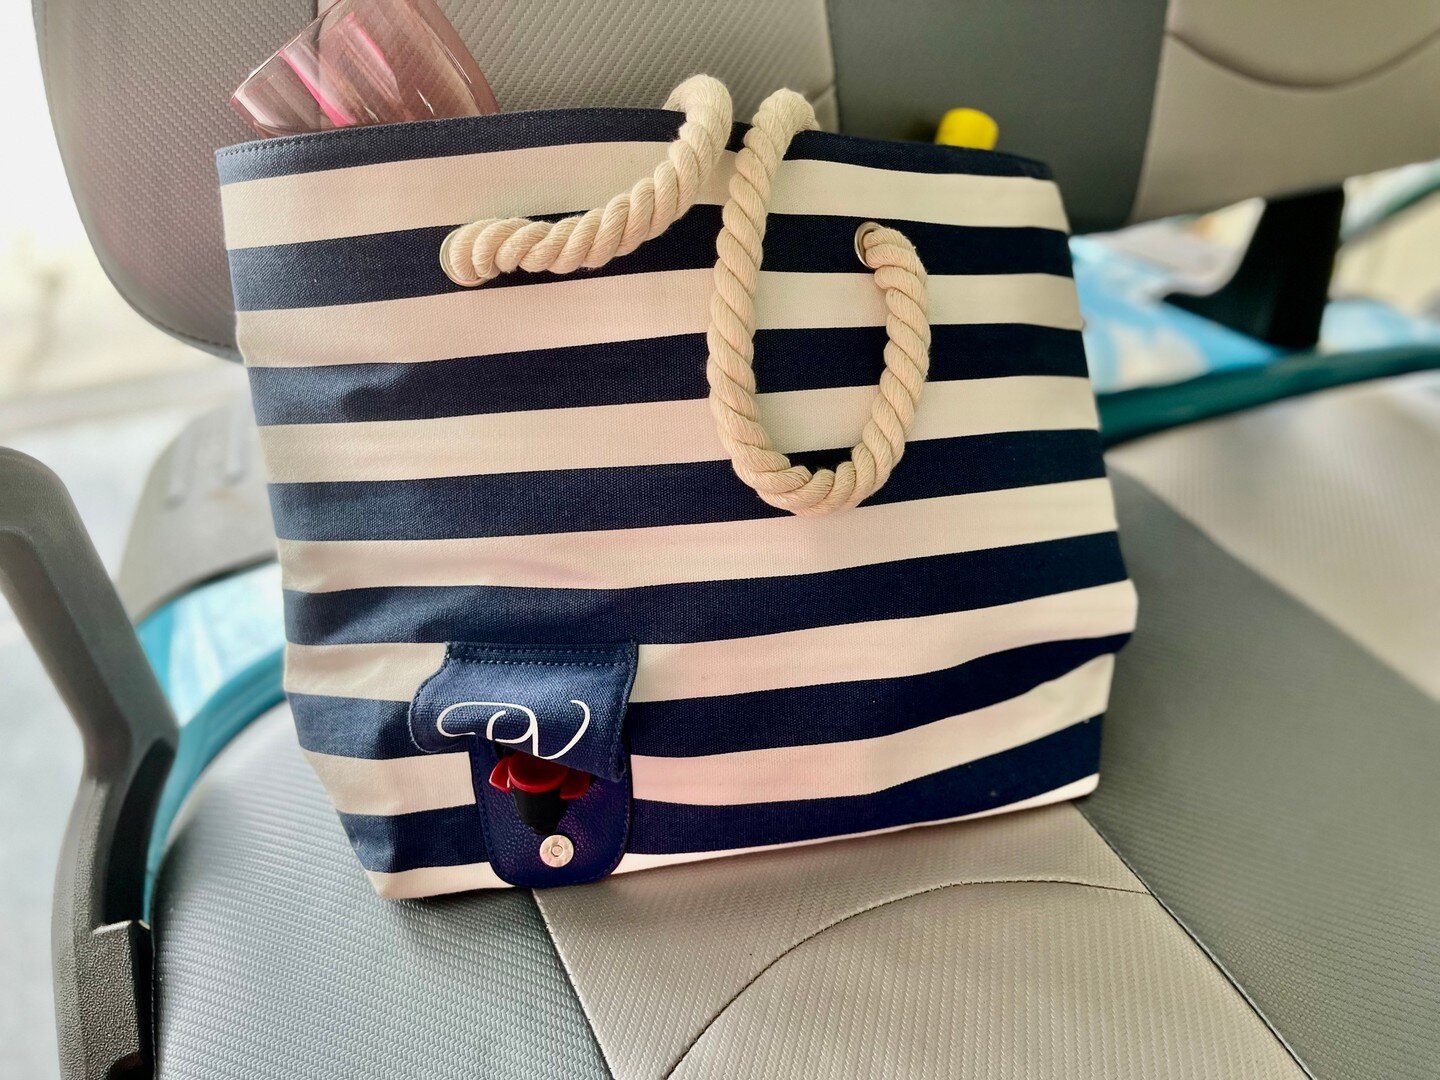 🌊 Getting ready to picnic with friends on a ⛵ I 💙 this great wine tote. Shop our favorite picnic products. Link in bio.
*
*
*
#travelbloggerlife #travelblogs #travelinsta #travelinstagram #instagramtravel #getawayoften #traveltoday #adventurelover 